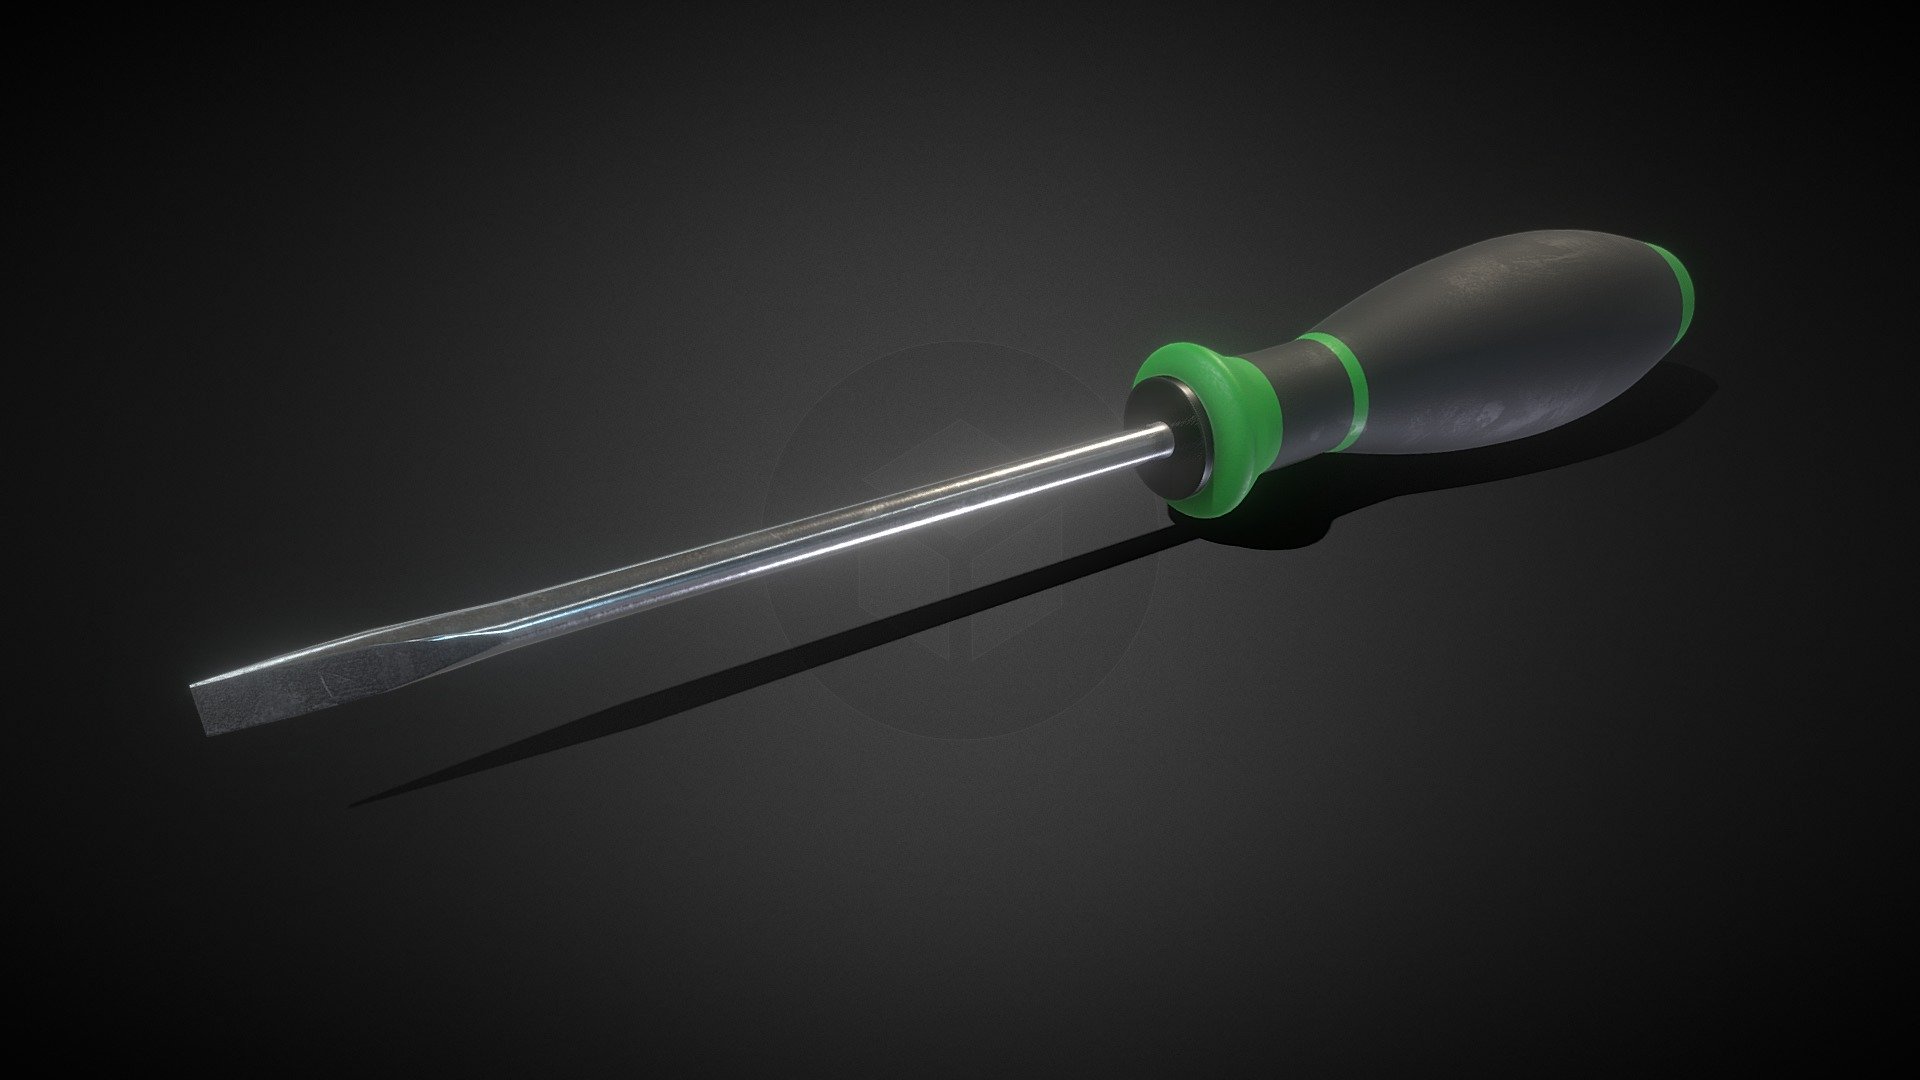 Flat Screw Driver.

4k quality textures.

Textured with Substance Painter 2 3d model